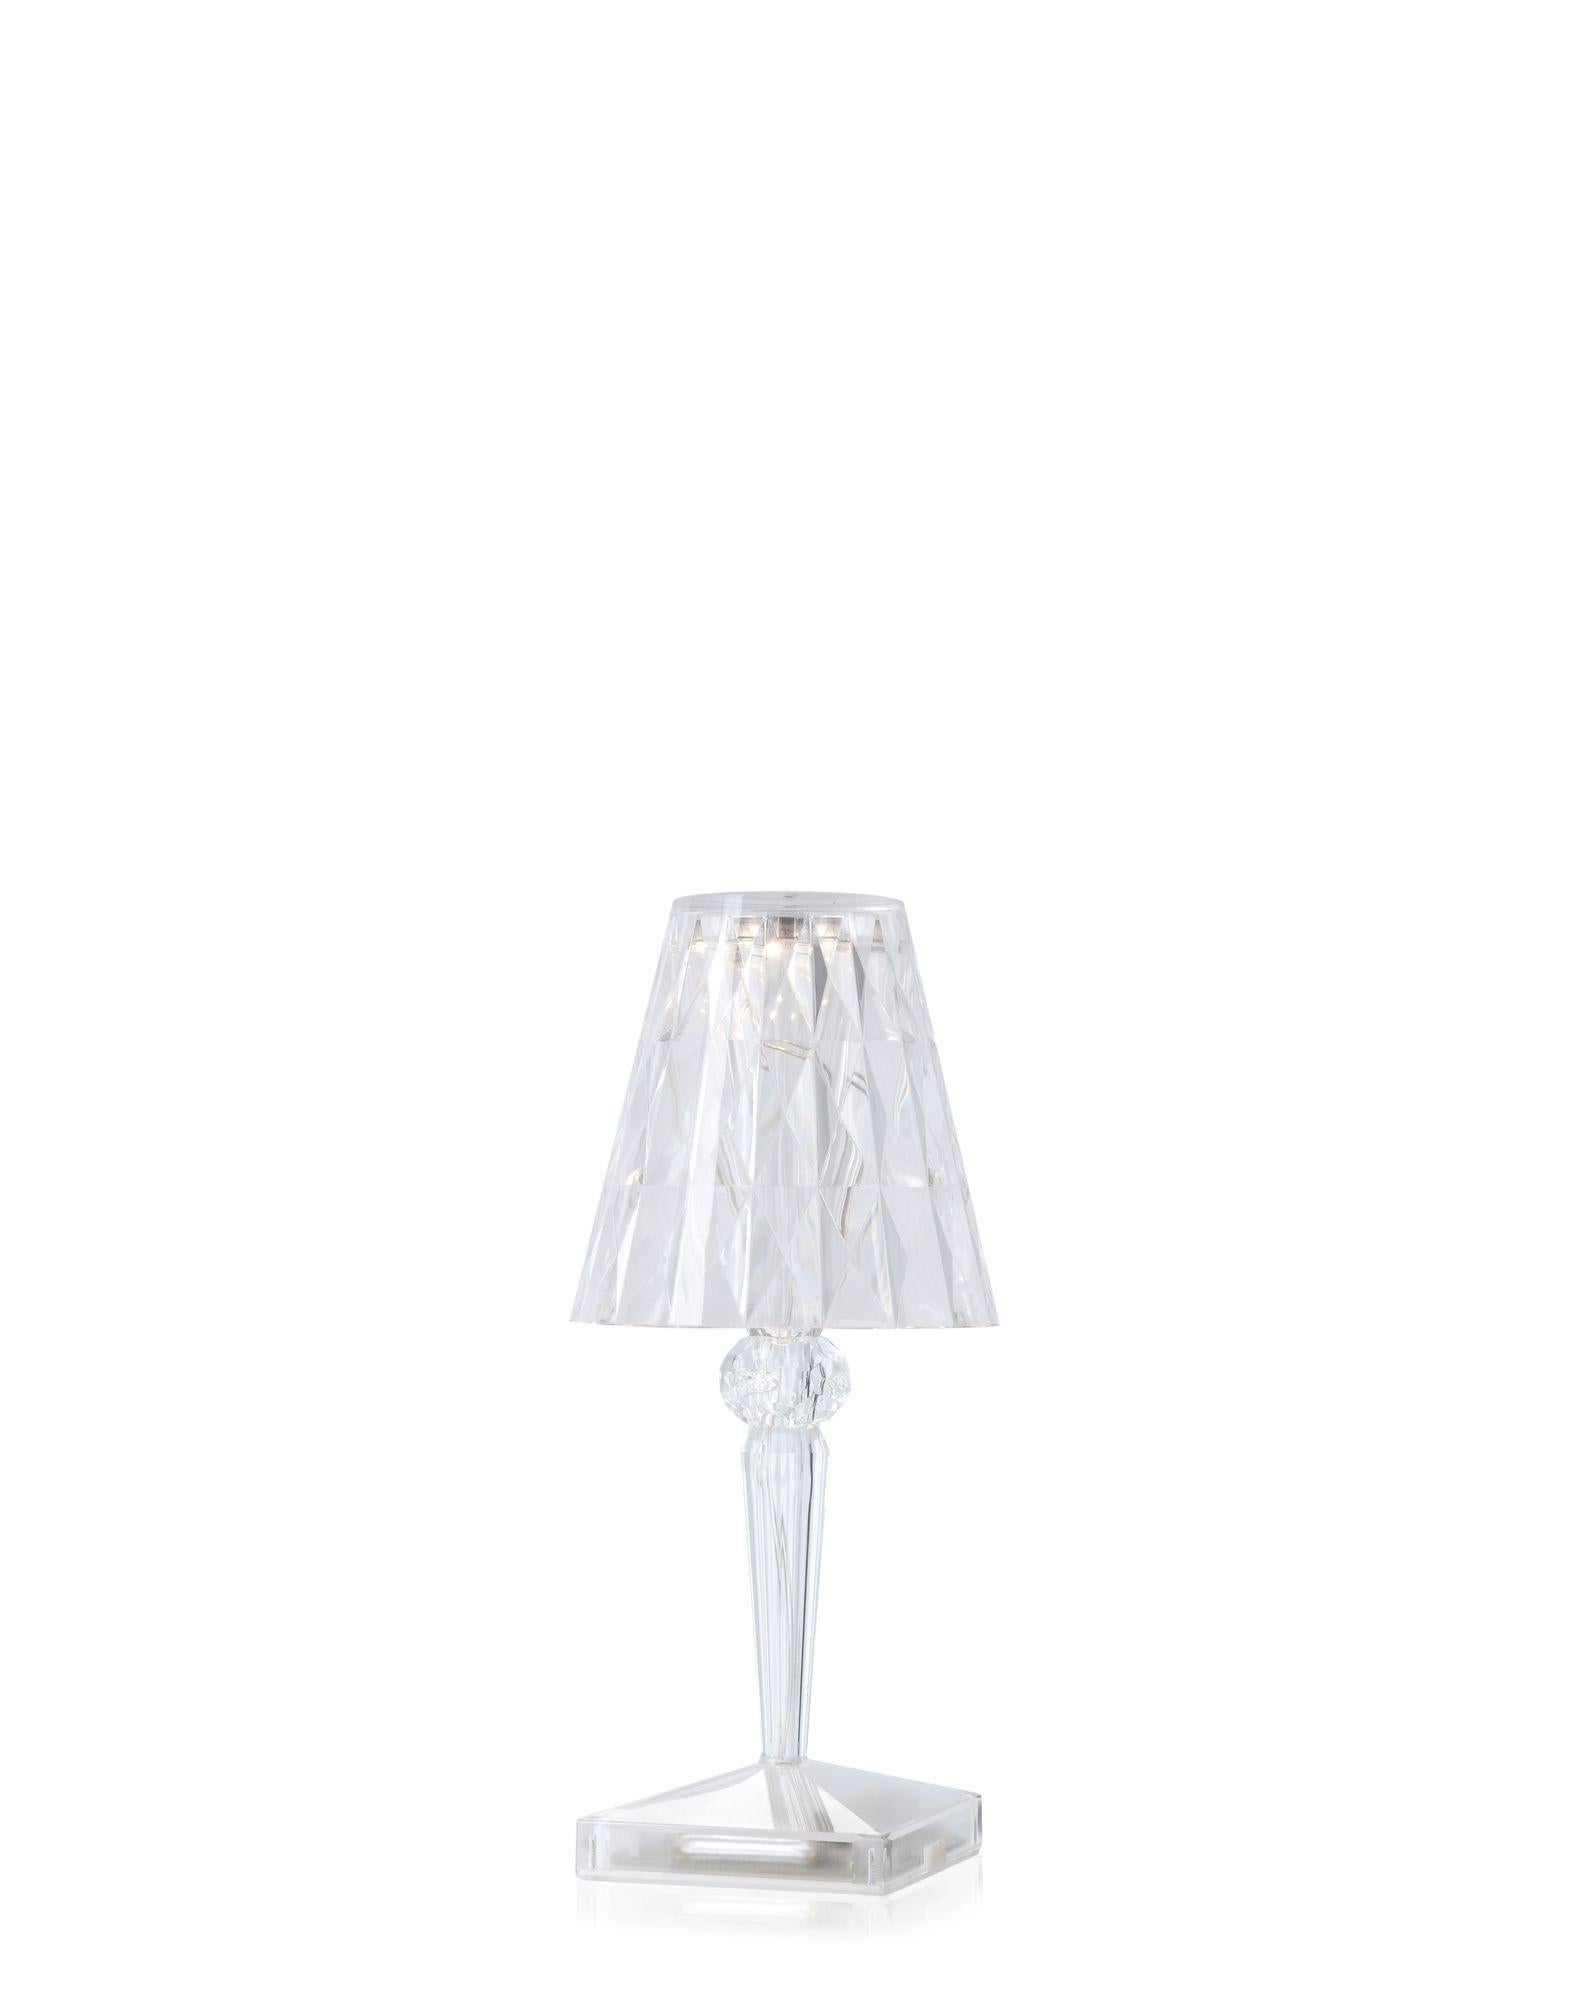 Battery is an iconic compact lampshade. It is made from transparent PMMA and truly embodies innovation, being 100% rechargeable when plugged in and with a battery life of up to 8 hours. This allows it to be moved around extremely easily: perfect for